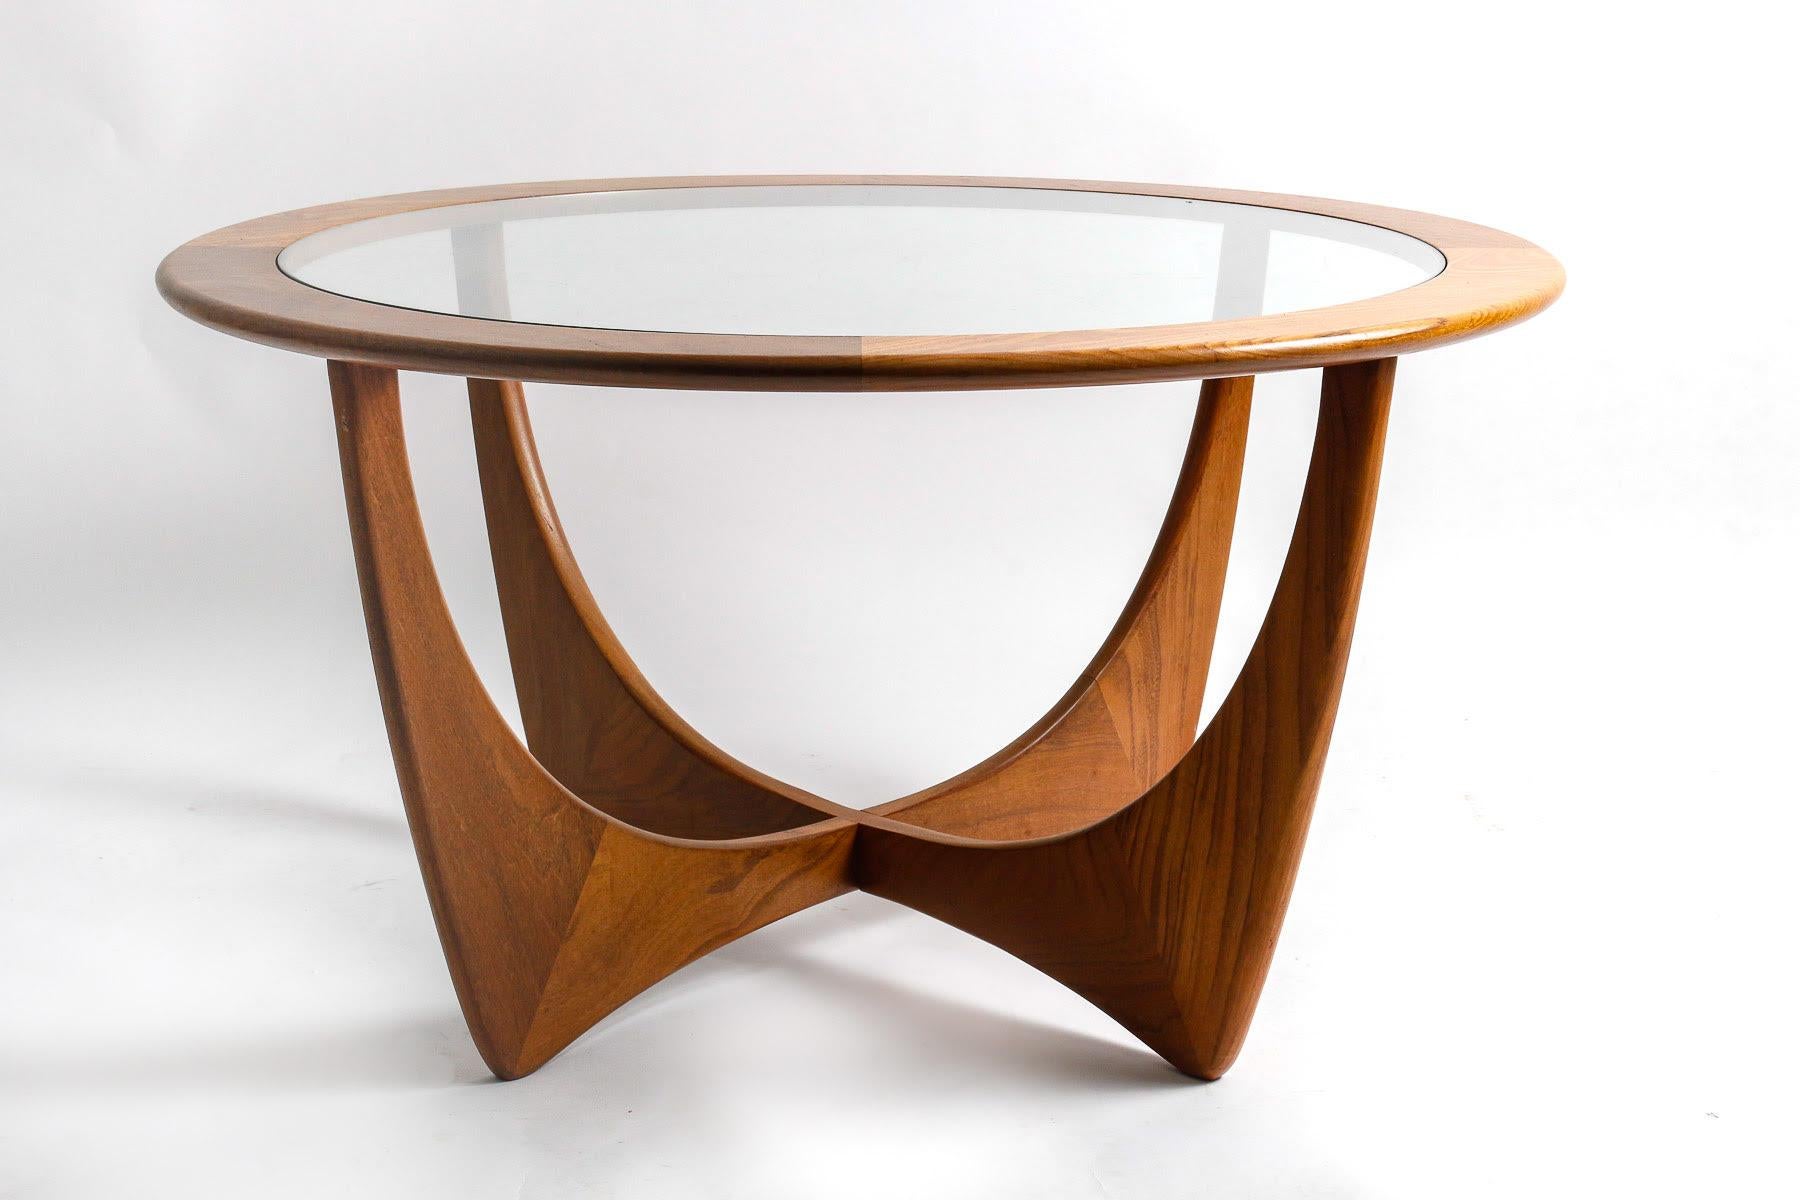 Astro coffee table by Victor Wilking, Circa 1969.

Astro model coffee table by Victor Wilking (1878-1972), England, in wood and glass from 1969.    
h: 45cm , w: 48cm, d: 63cm